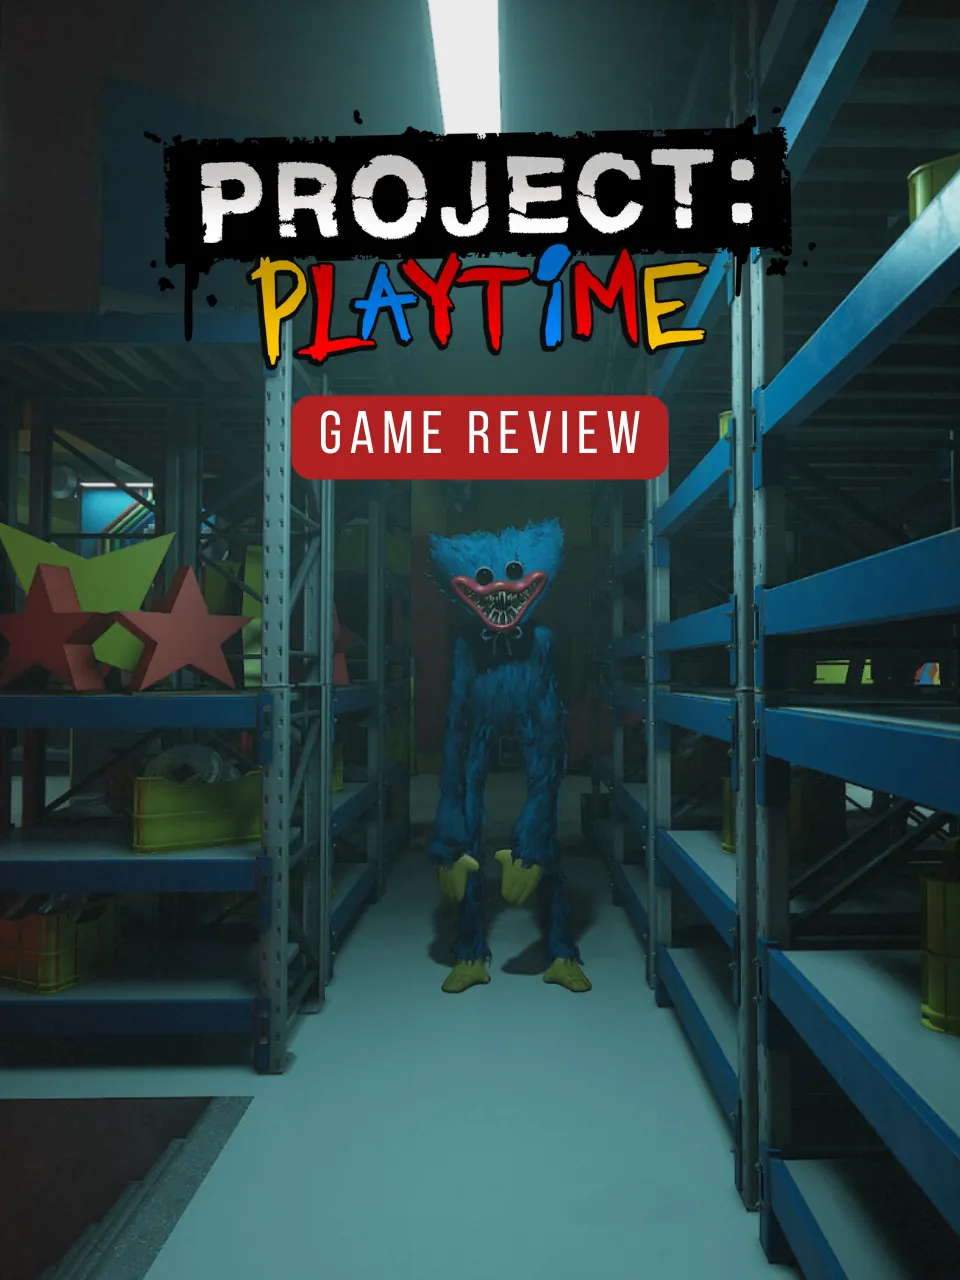 The Project: Playtime Experience in 10 Games 